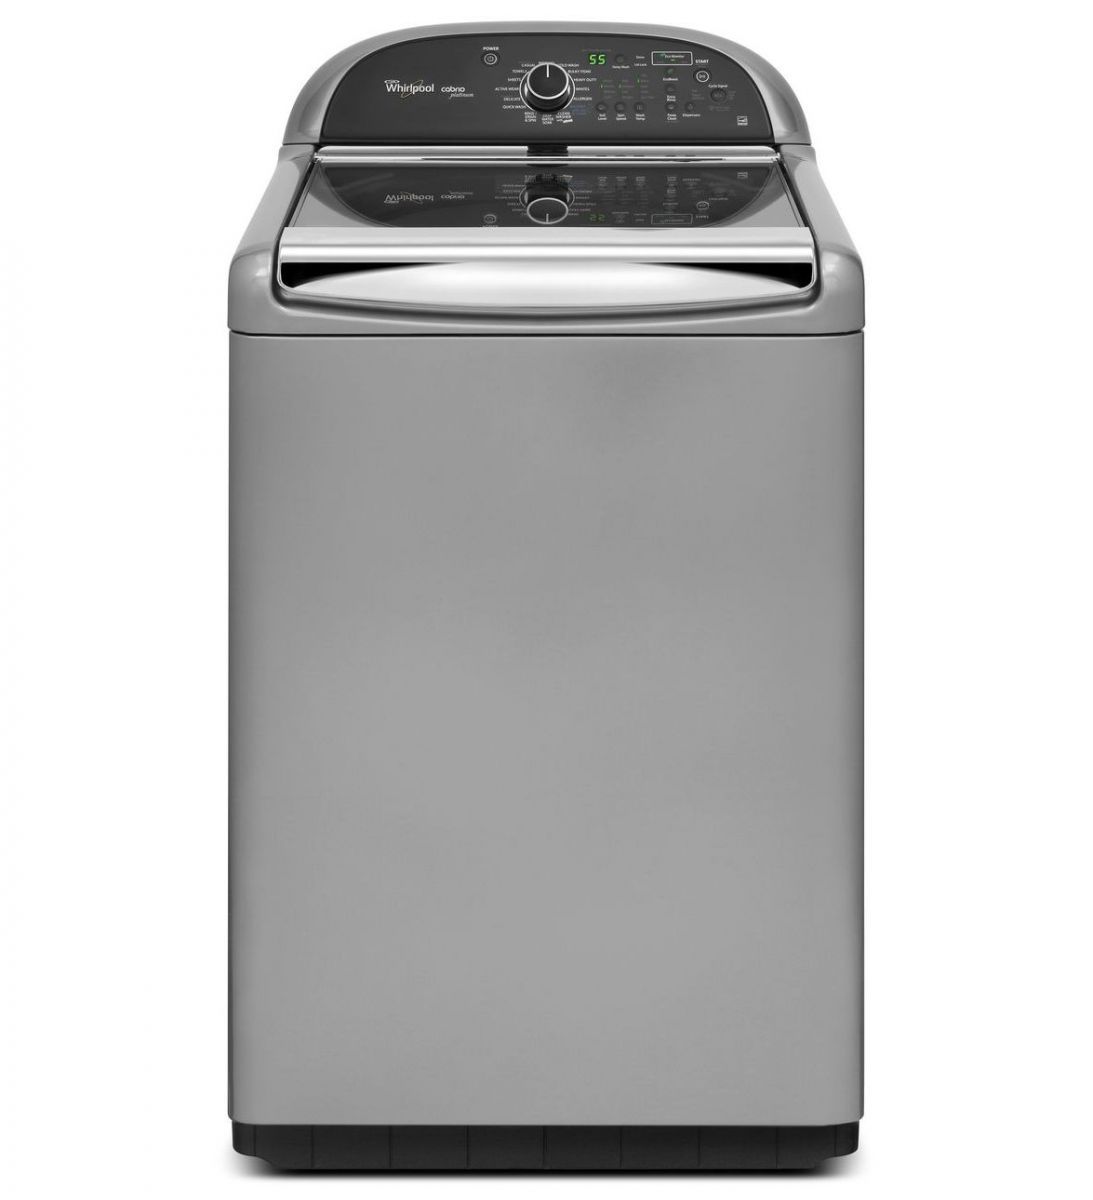 Whirlpool WTW8900BC0 Cabrio® Platinum 4.8 cu. ft. HE Top Load Washer